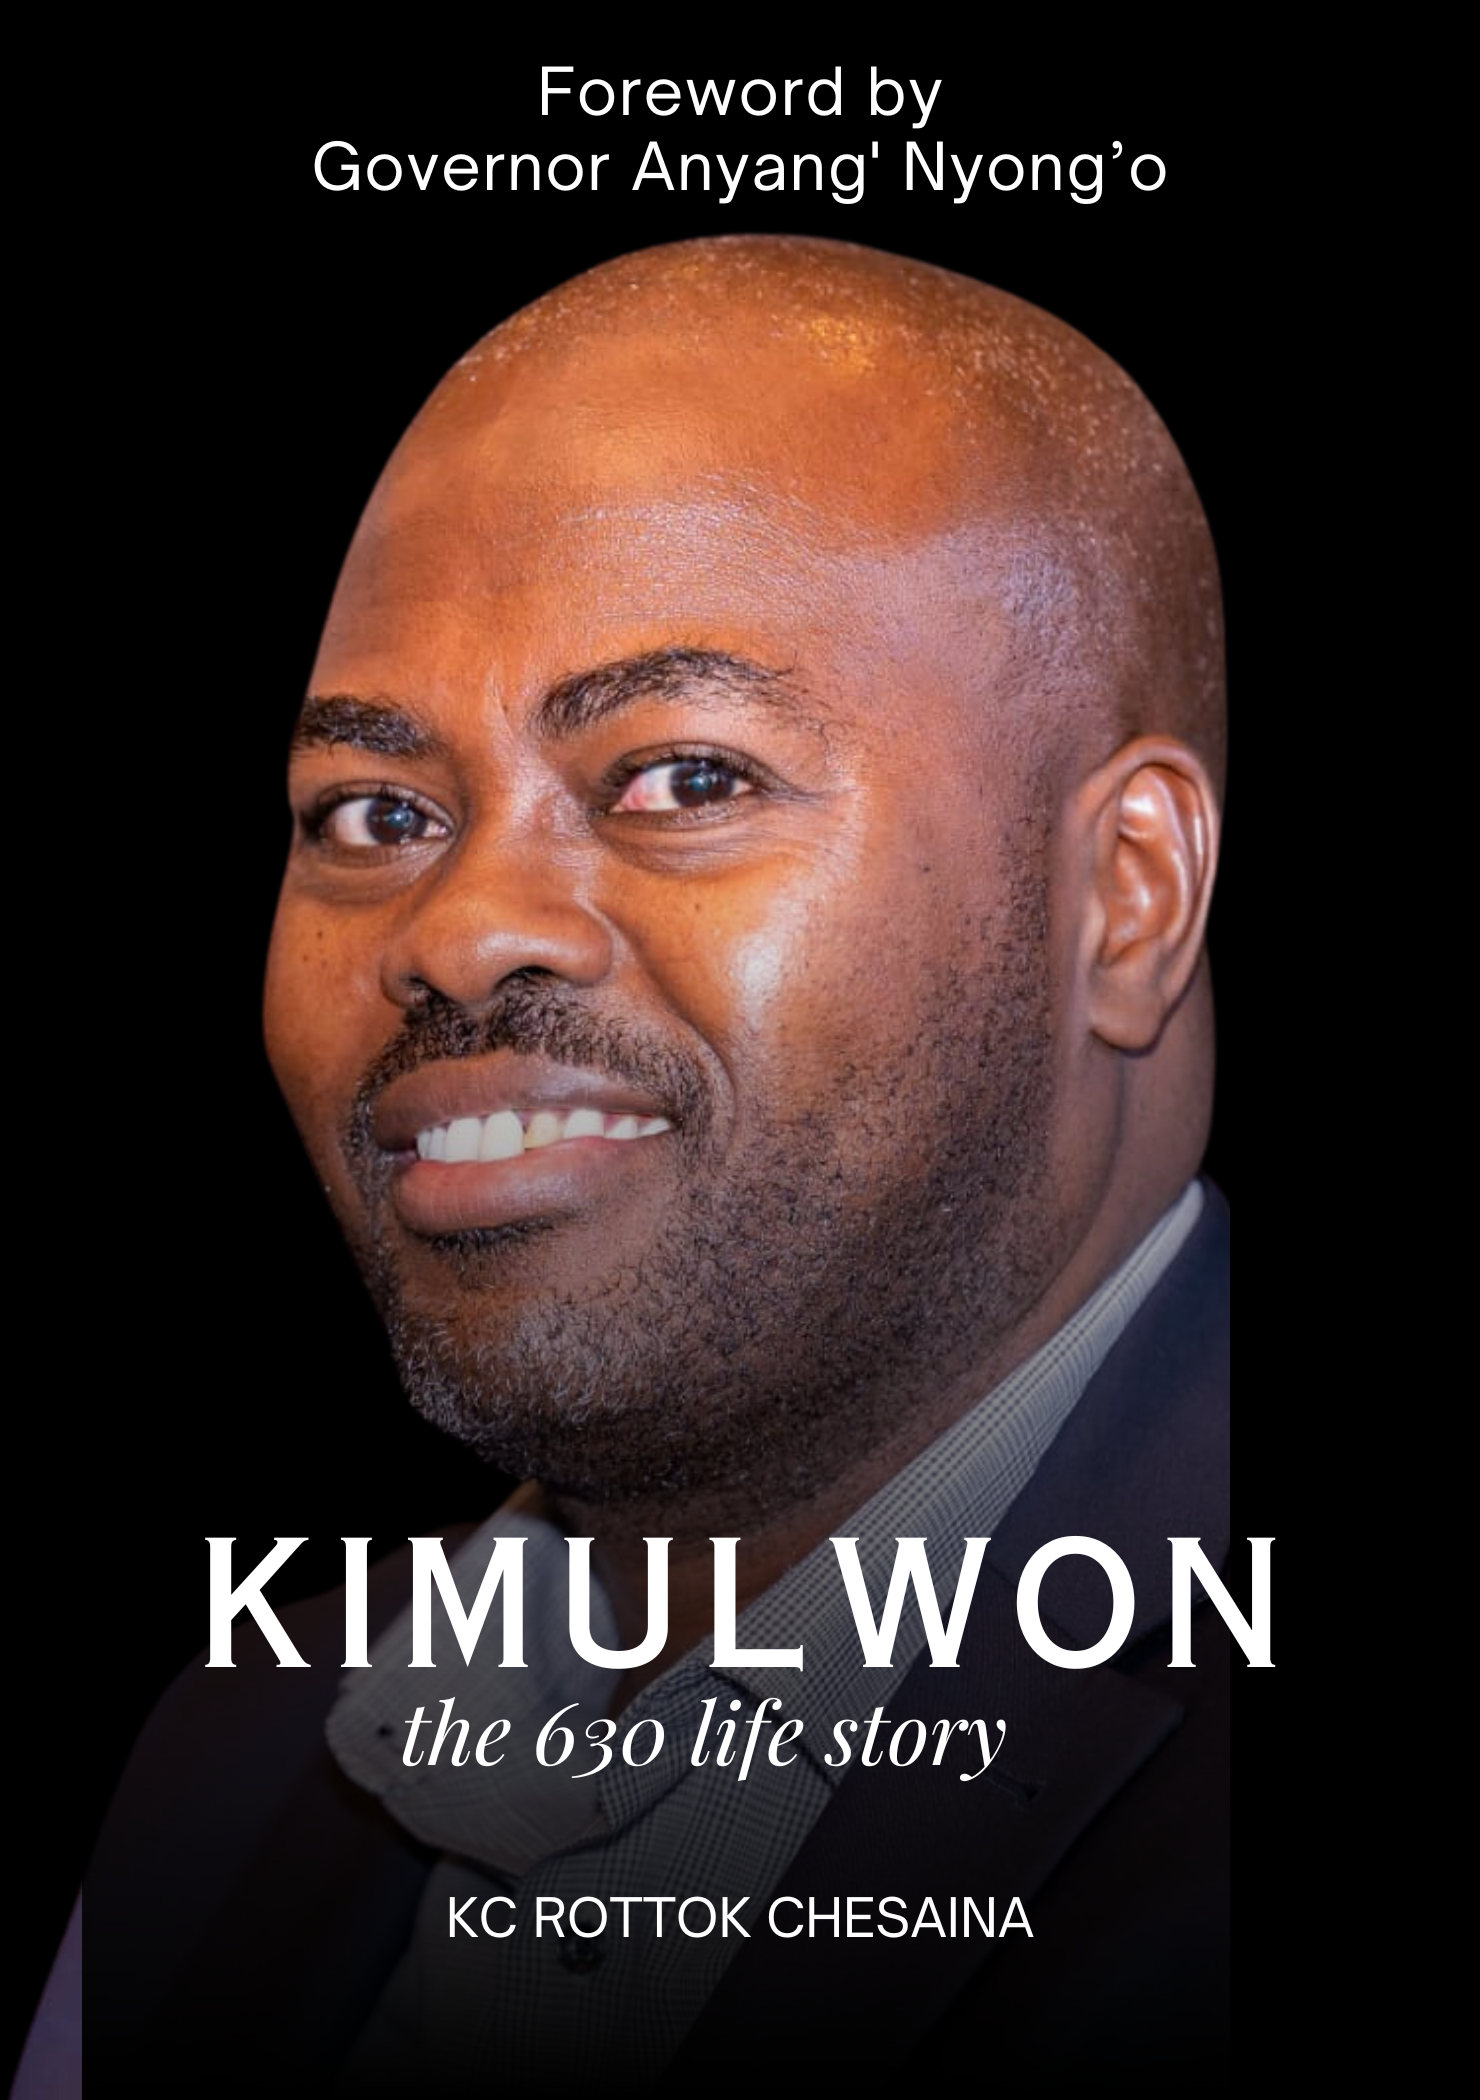 Copy of Kimulwon Book Cover (1480 × 2100 px)